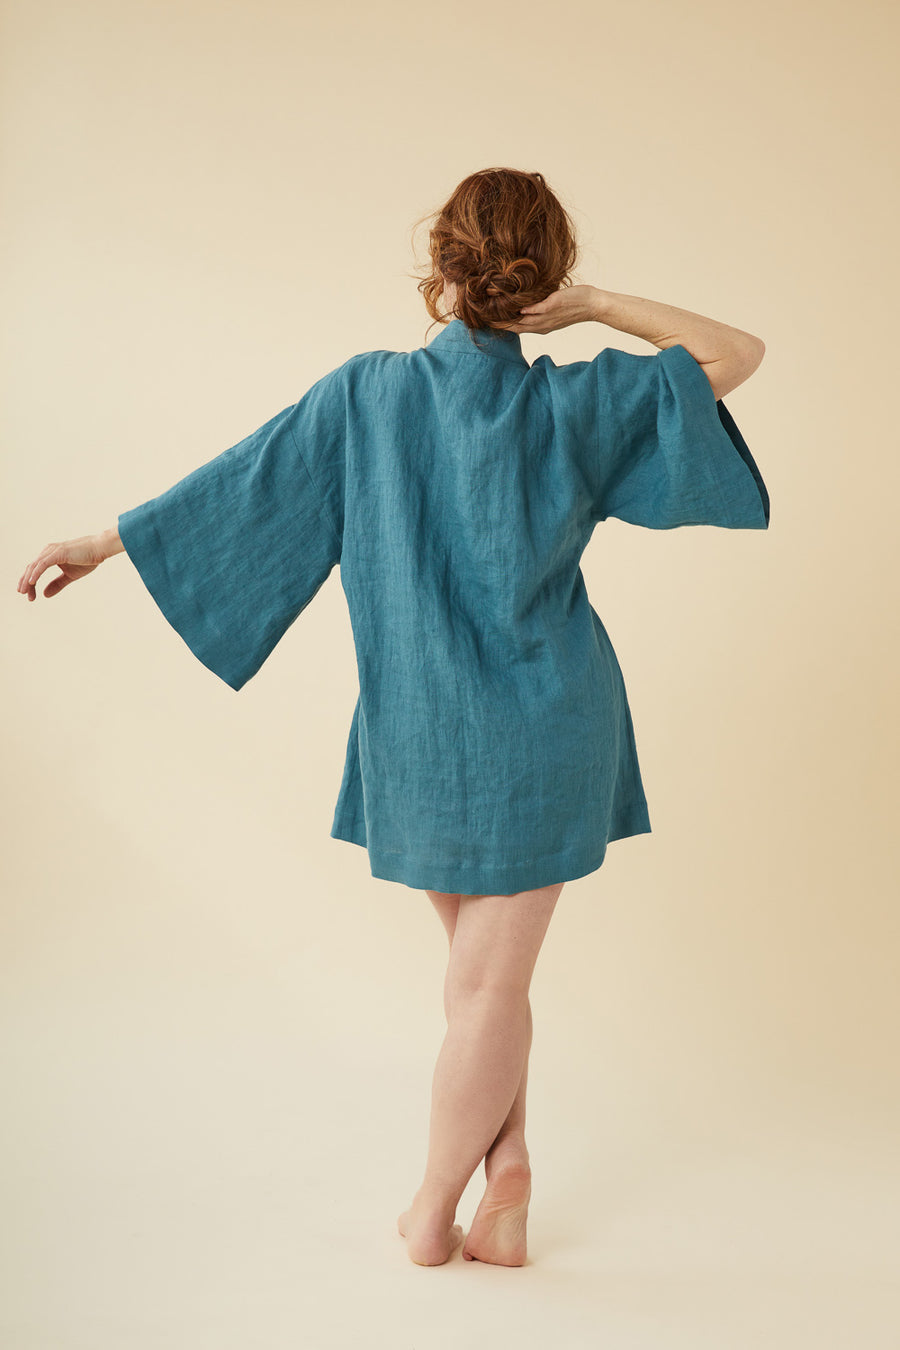 Whitlow robe – In the Folds